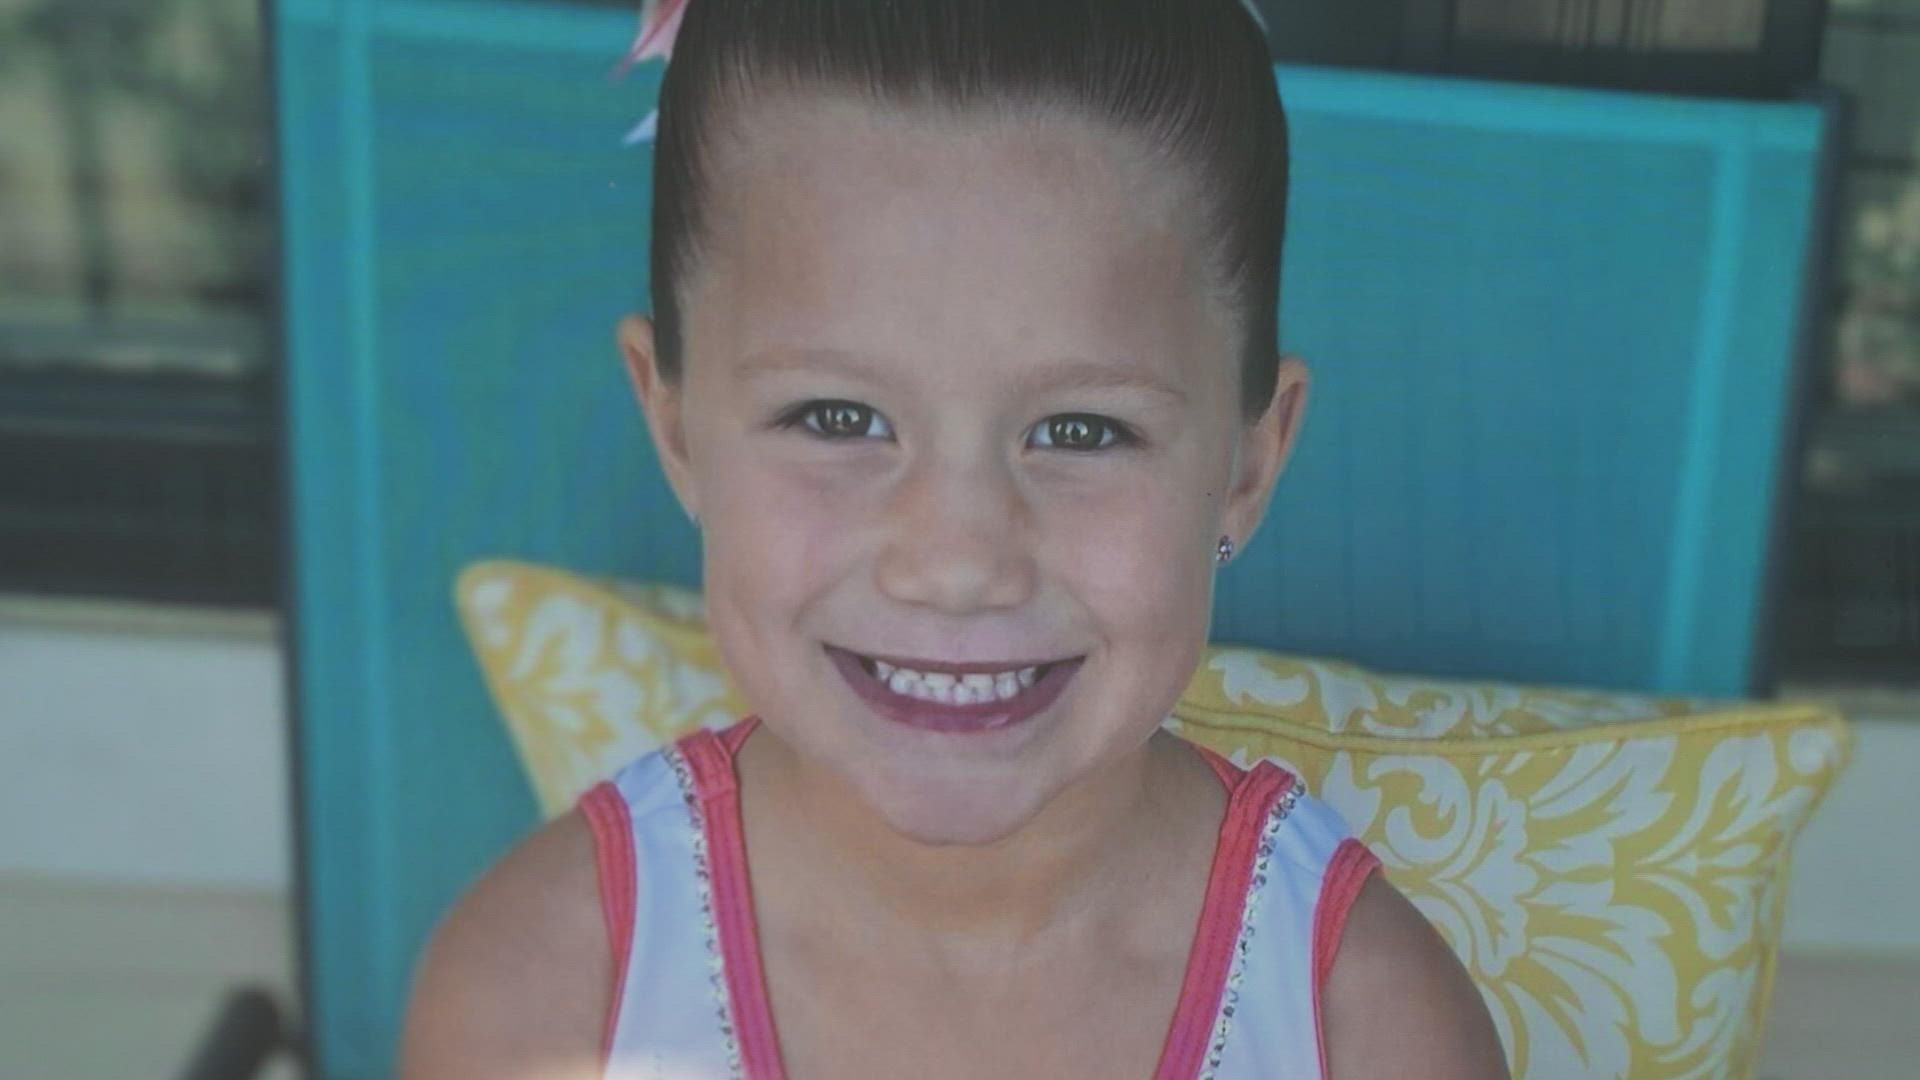 Emory Sayre had just gotten off a school bus in front of her home when she was hit and run over.